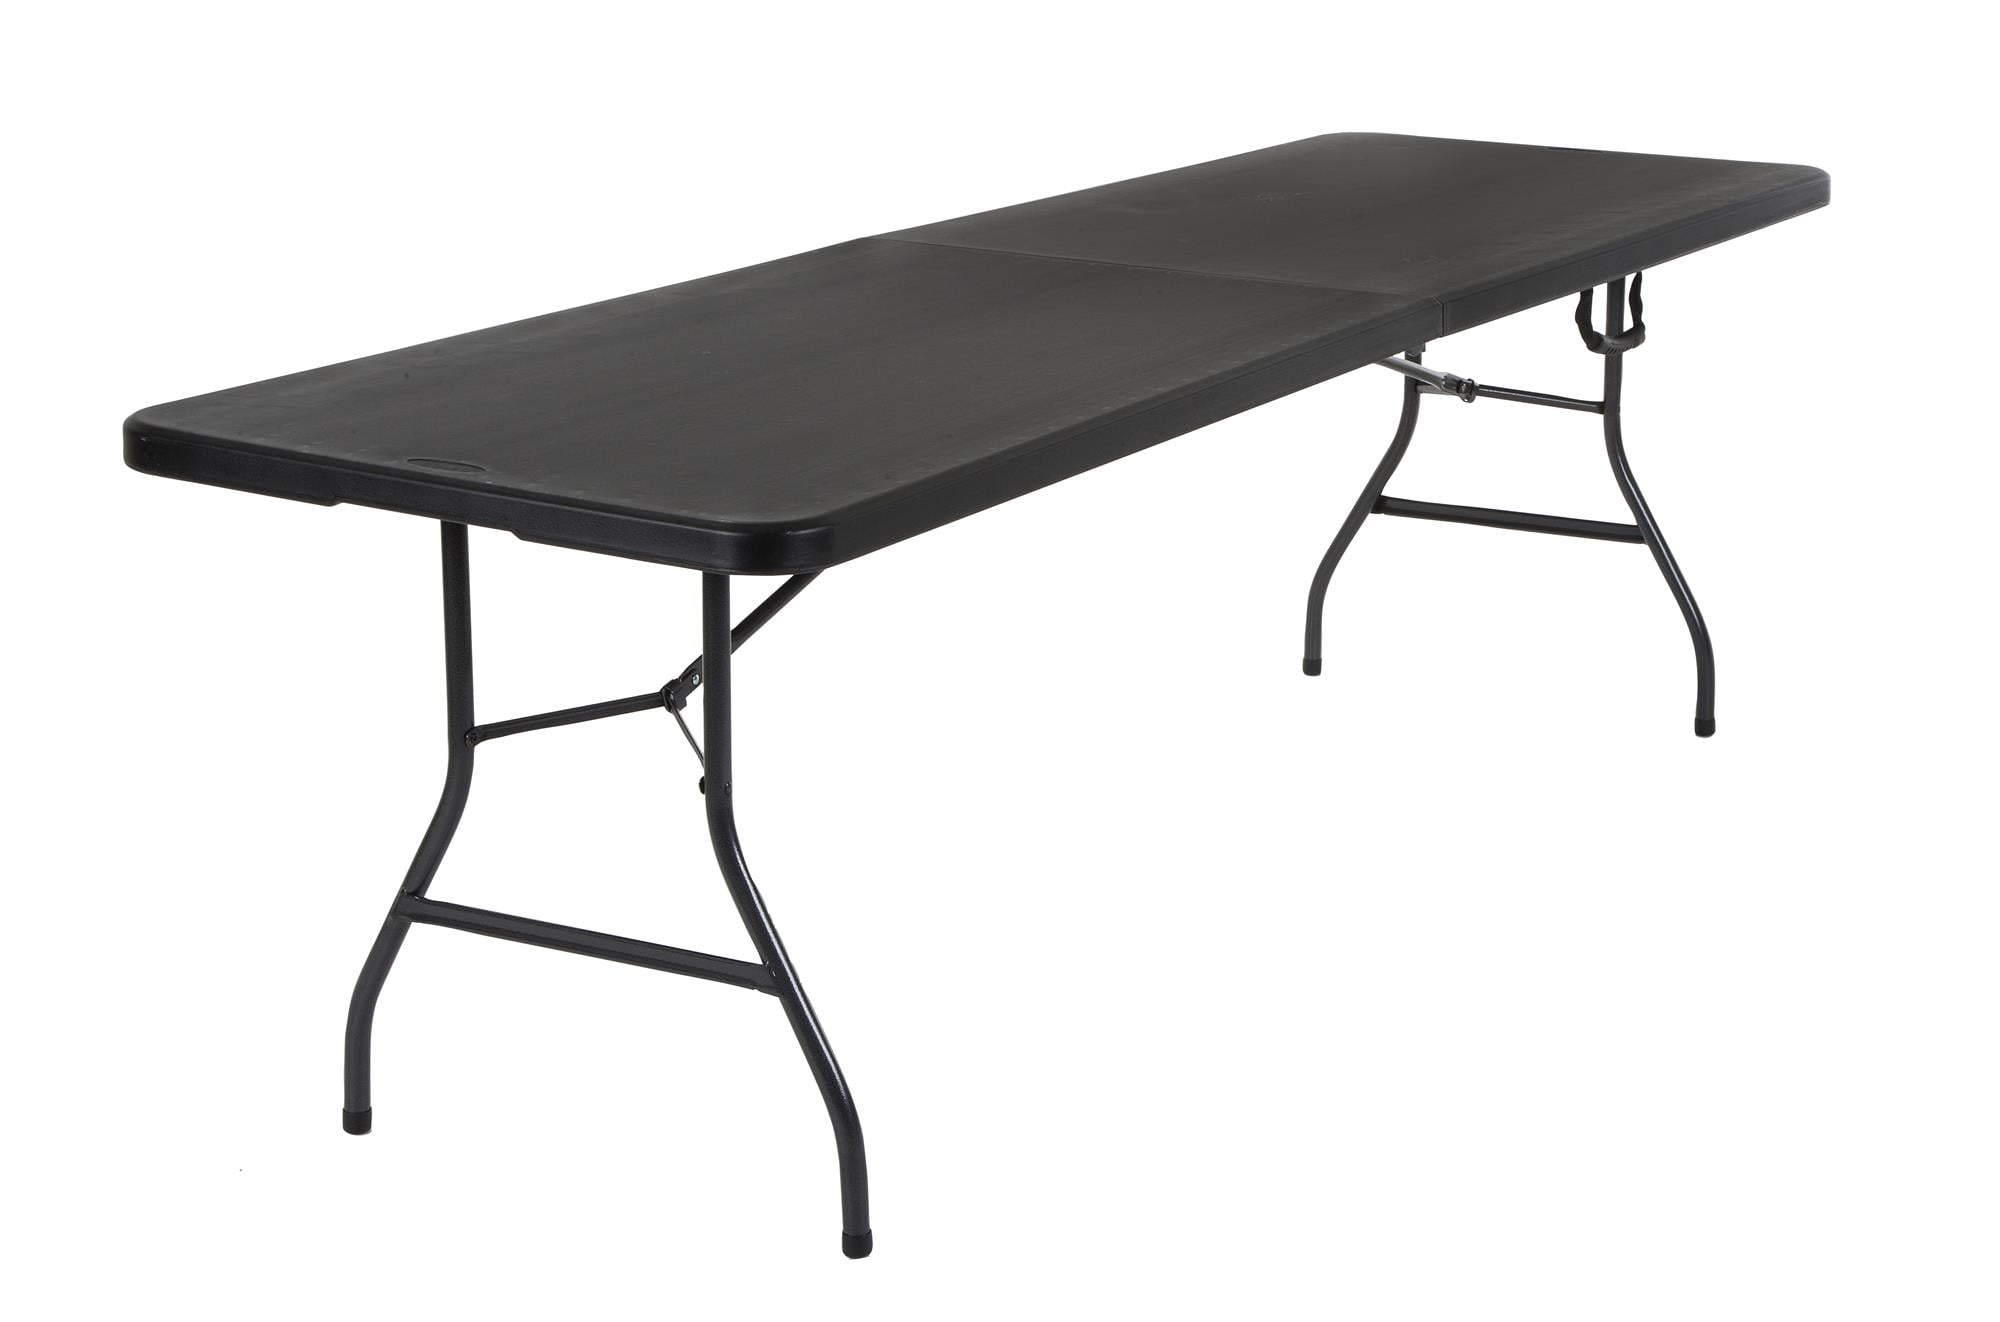 8 foot folding table home depot